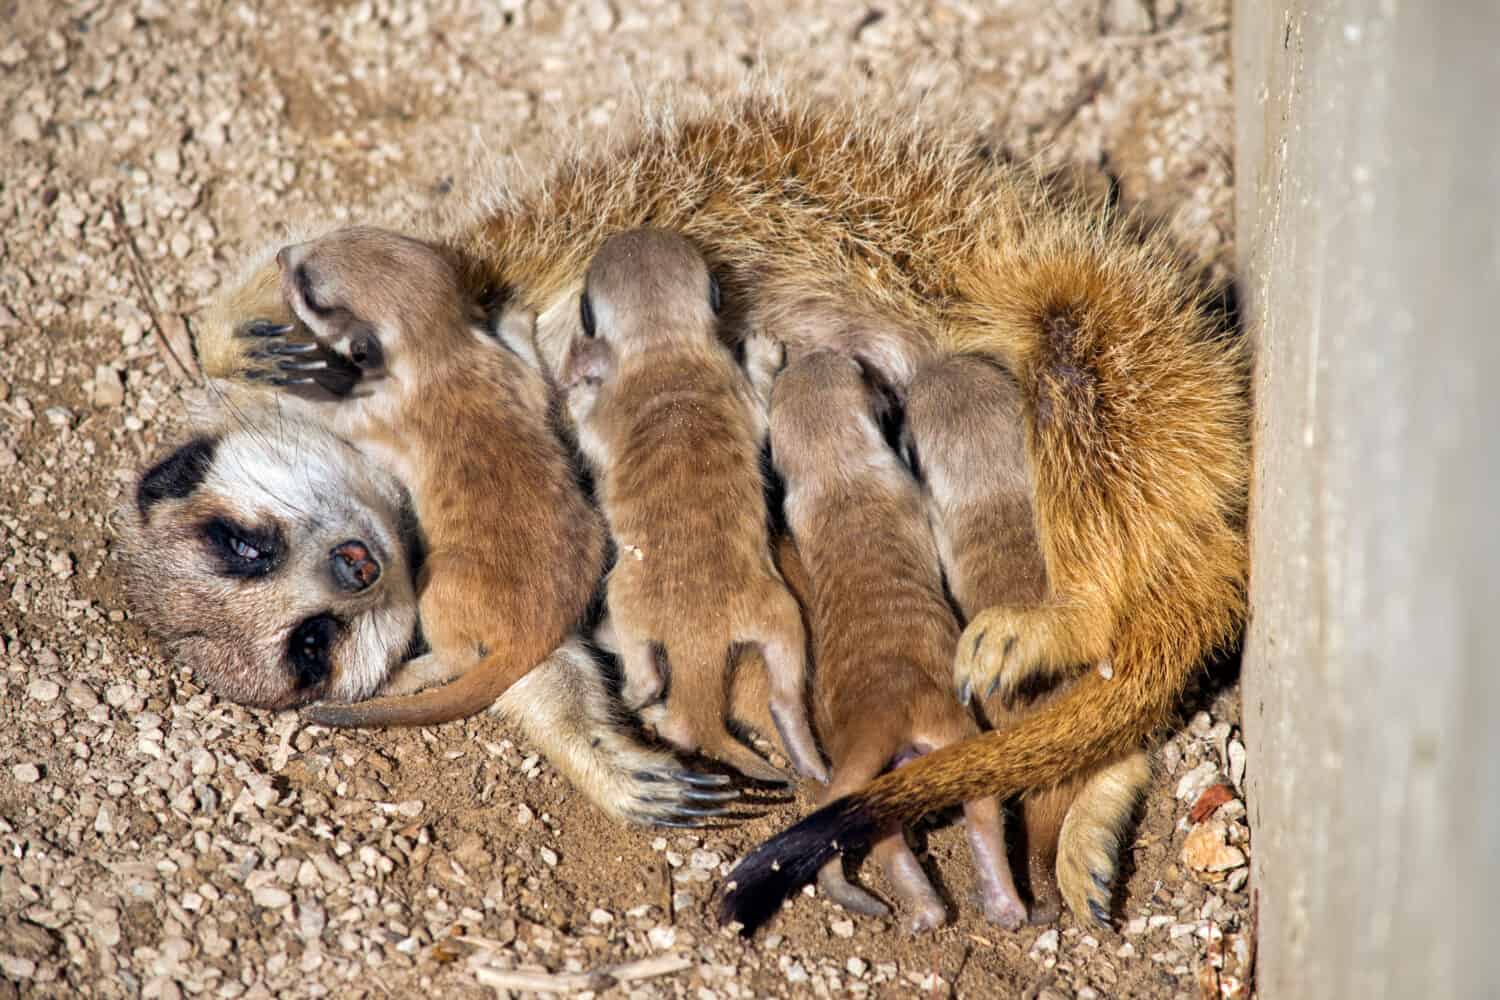 the meerkat 9 day old babies are feeding milk from the mother meerkat